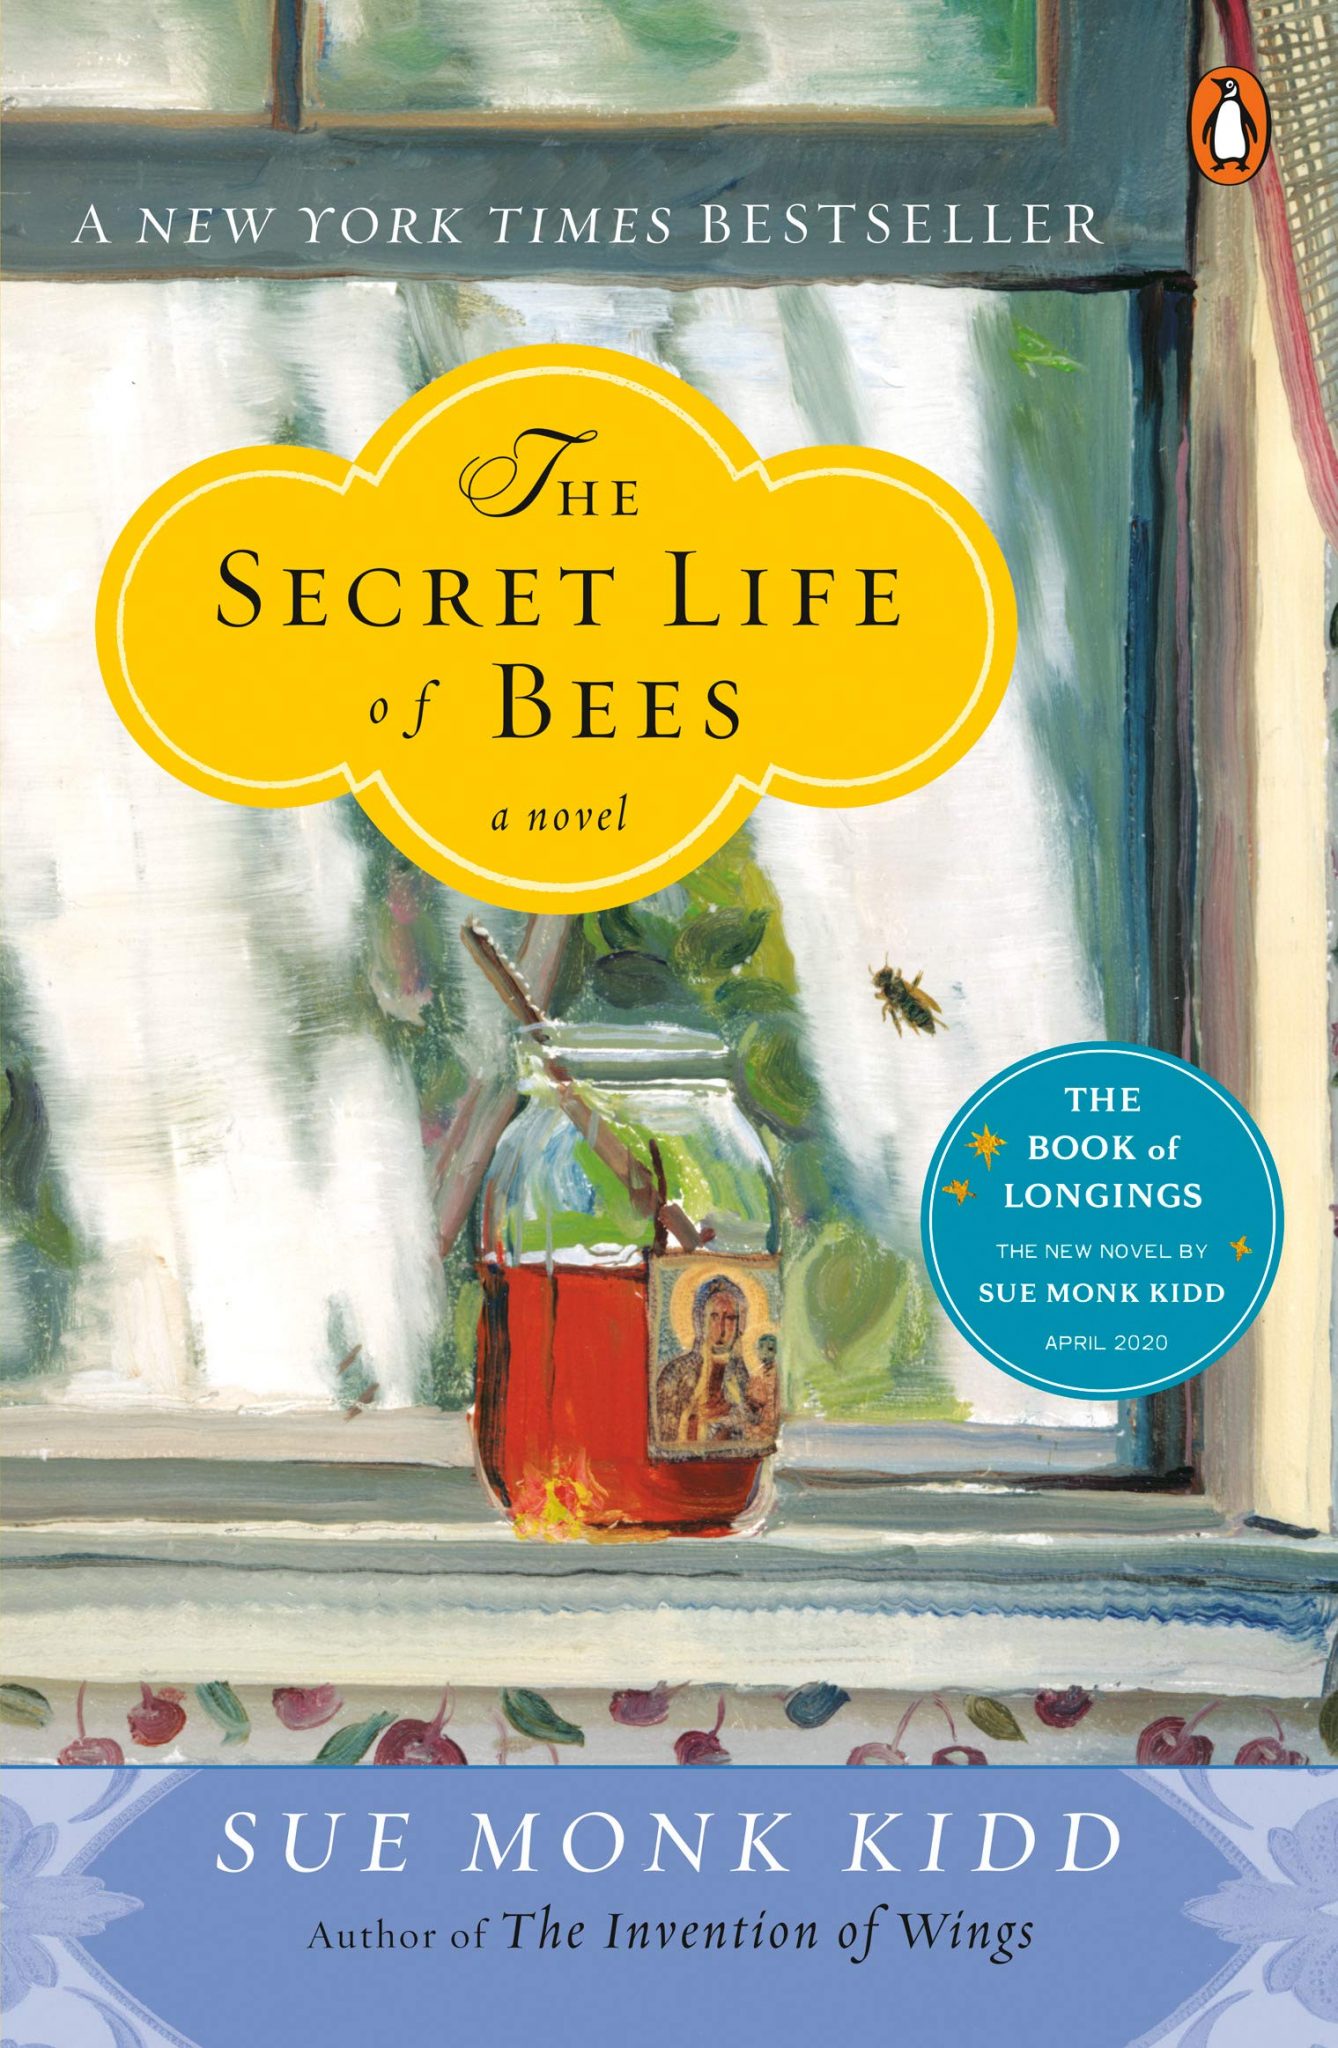 the secret life of bees book report